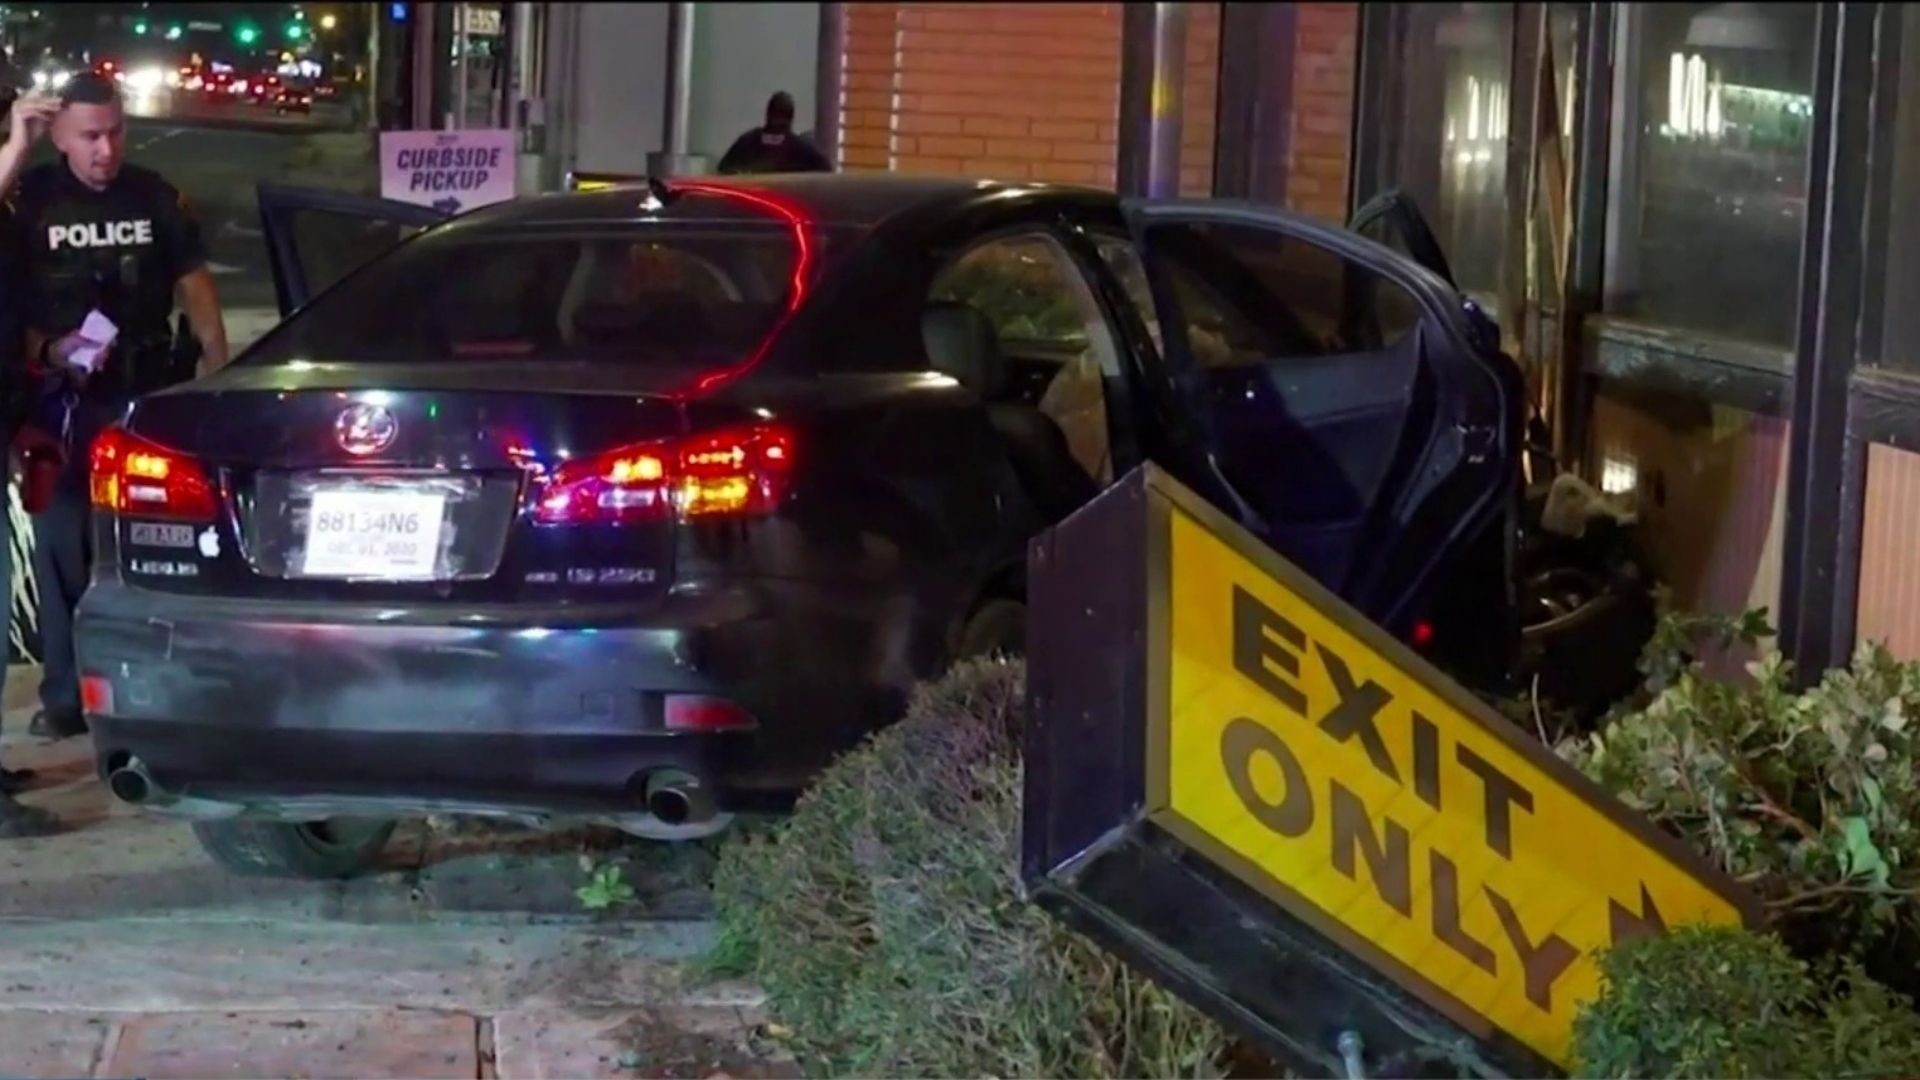 HPD: Vehicle crashes into Pappas Burger on Westheimer Road